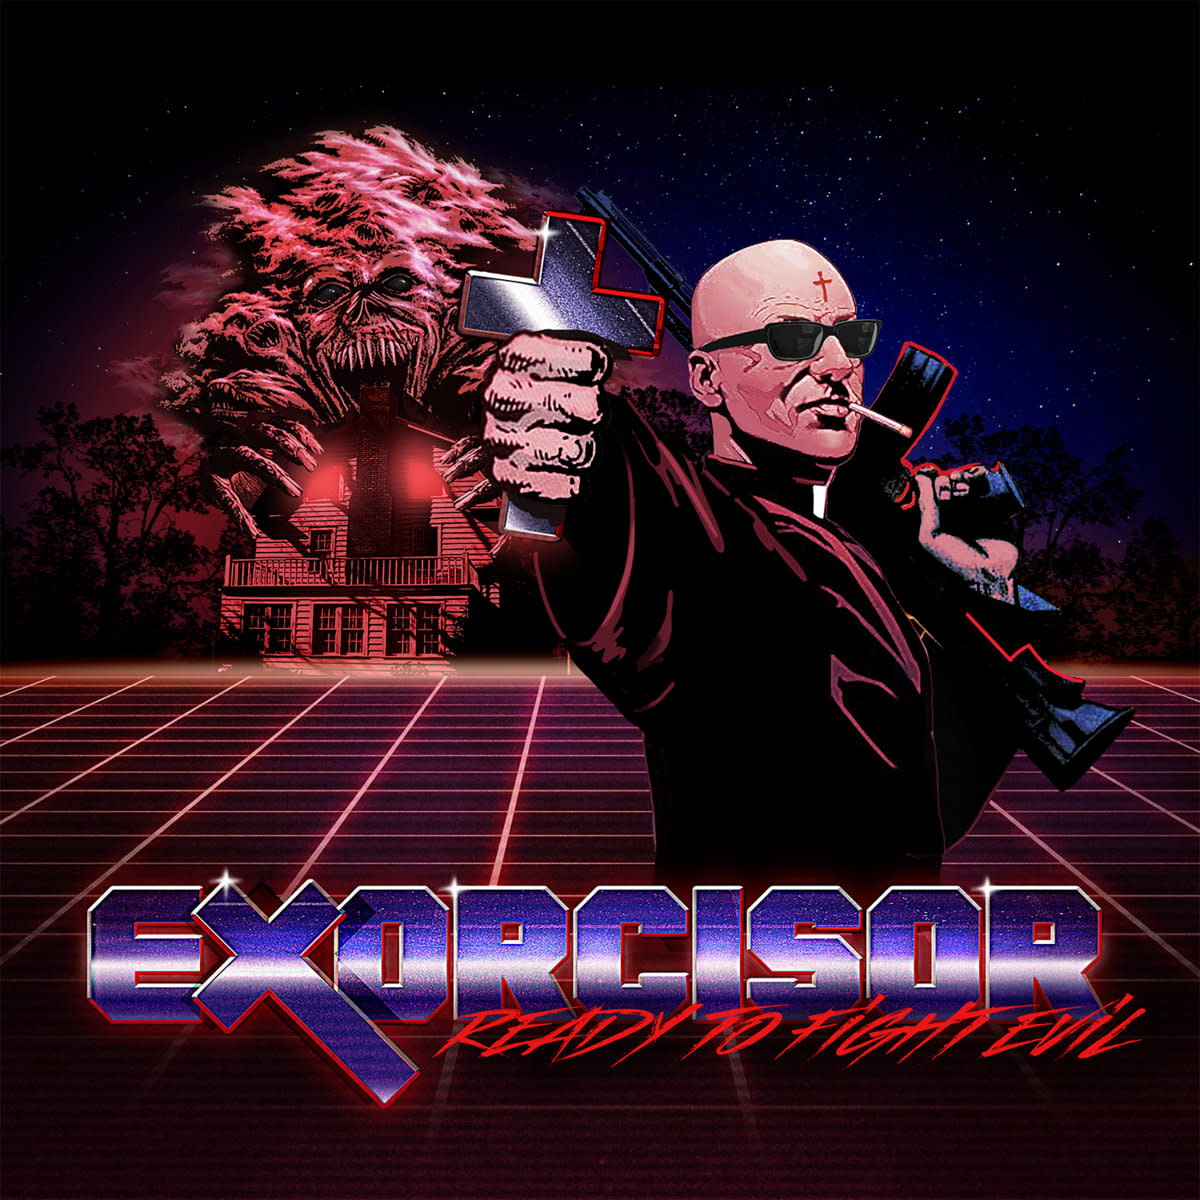 synth-album-review-ready-to-fight-evil-by-exorcisor